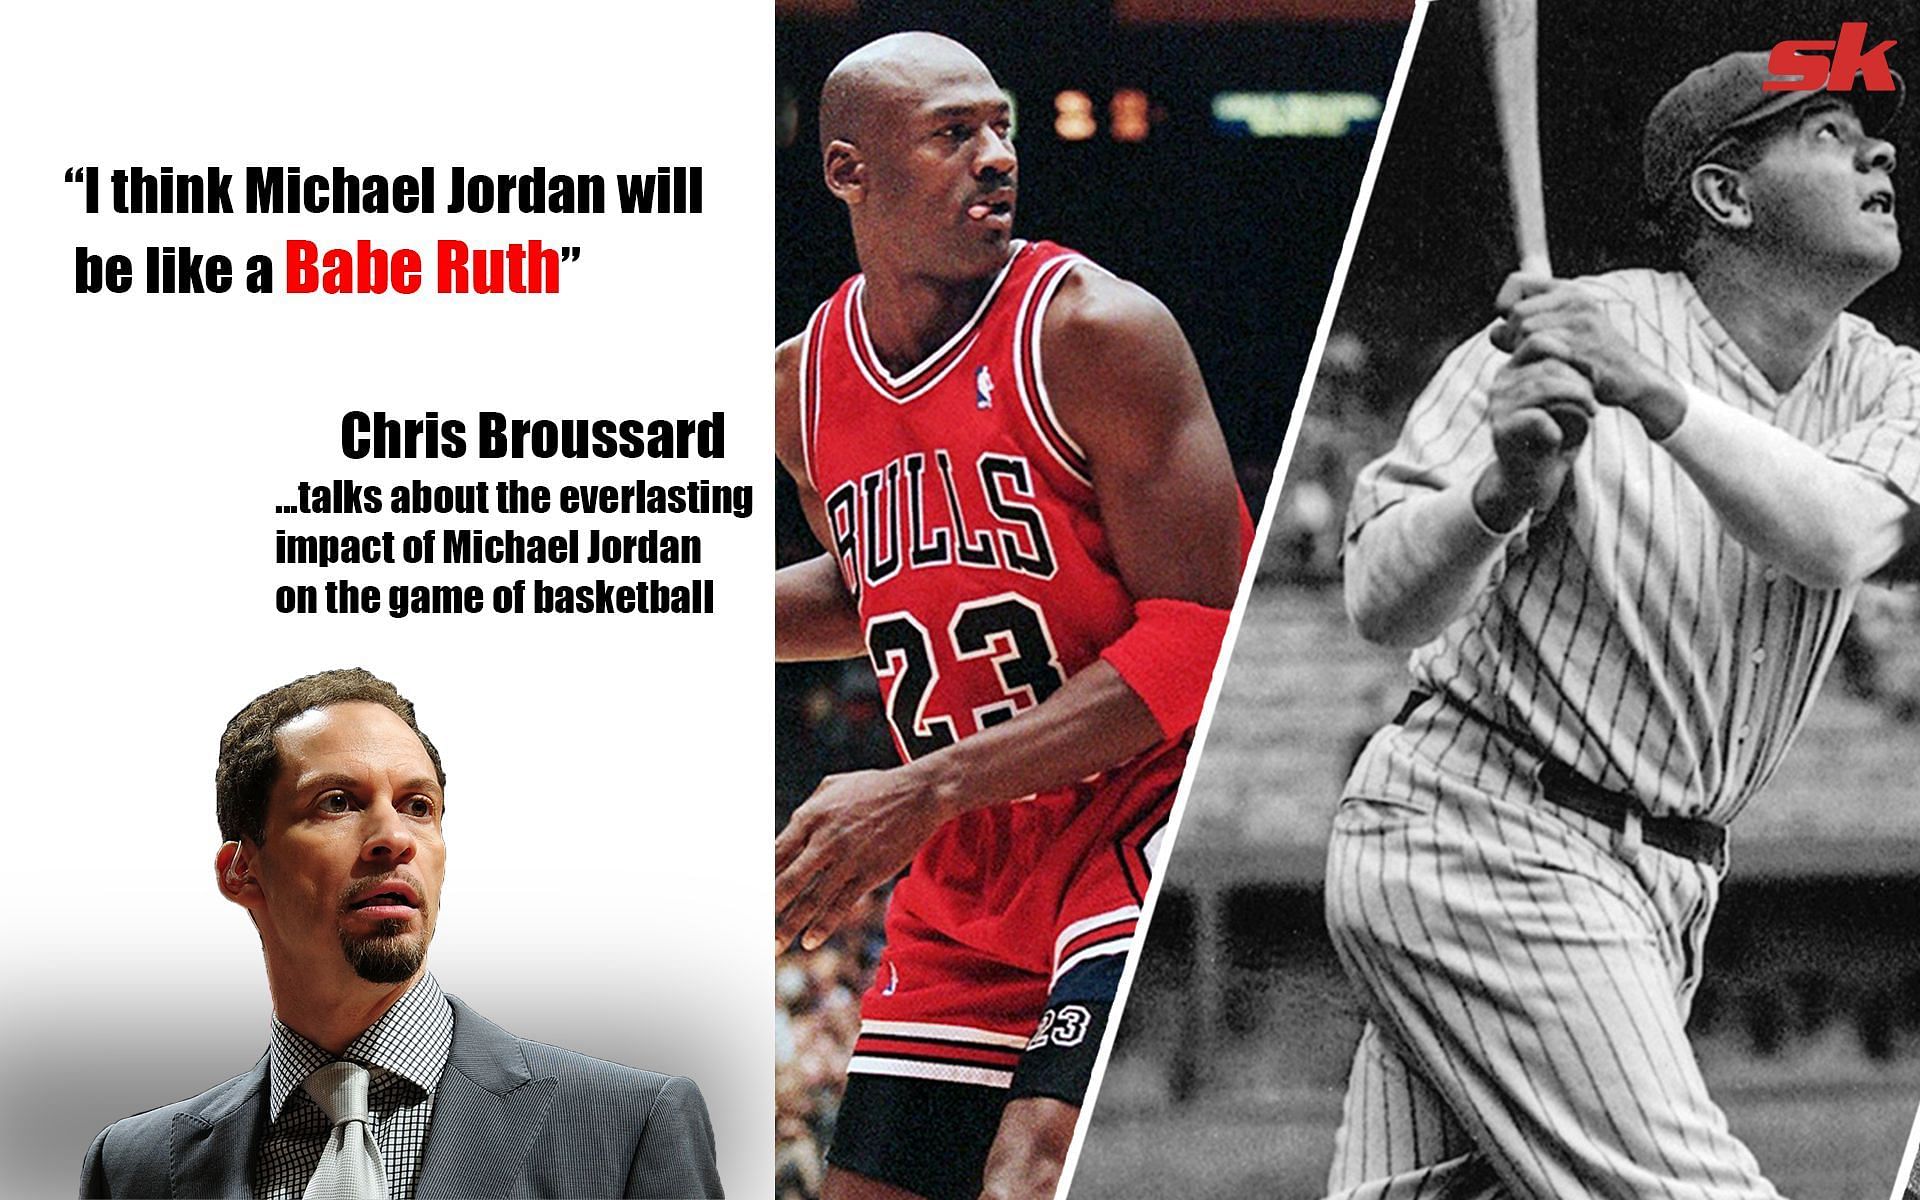 Chris Broussard makes comments about Michael Jordan&#039;s legend status, in response to comments made by Dwyane Wade.